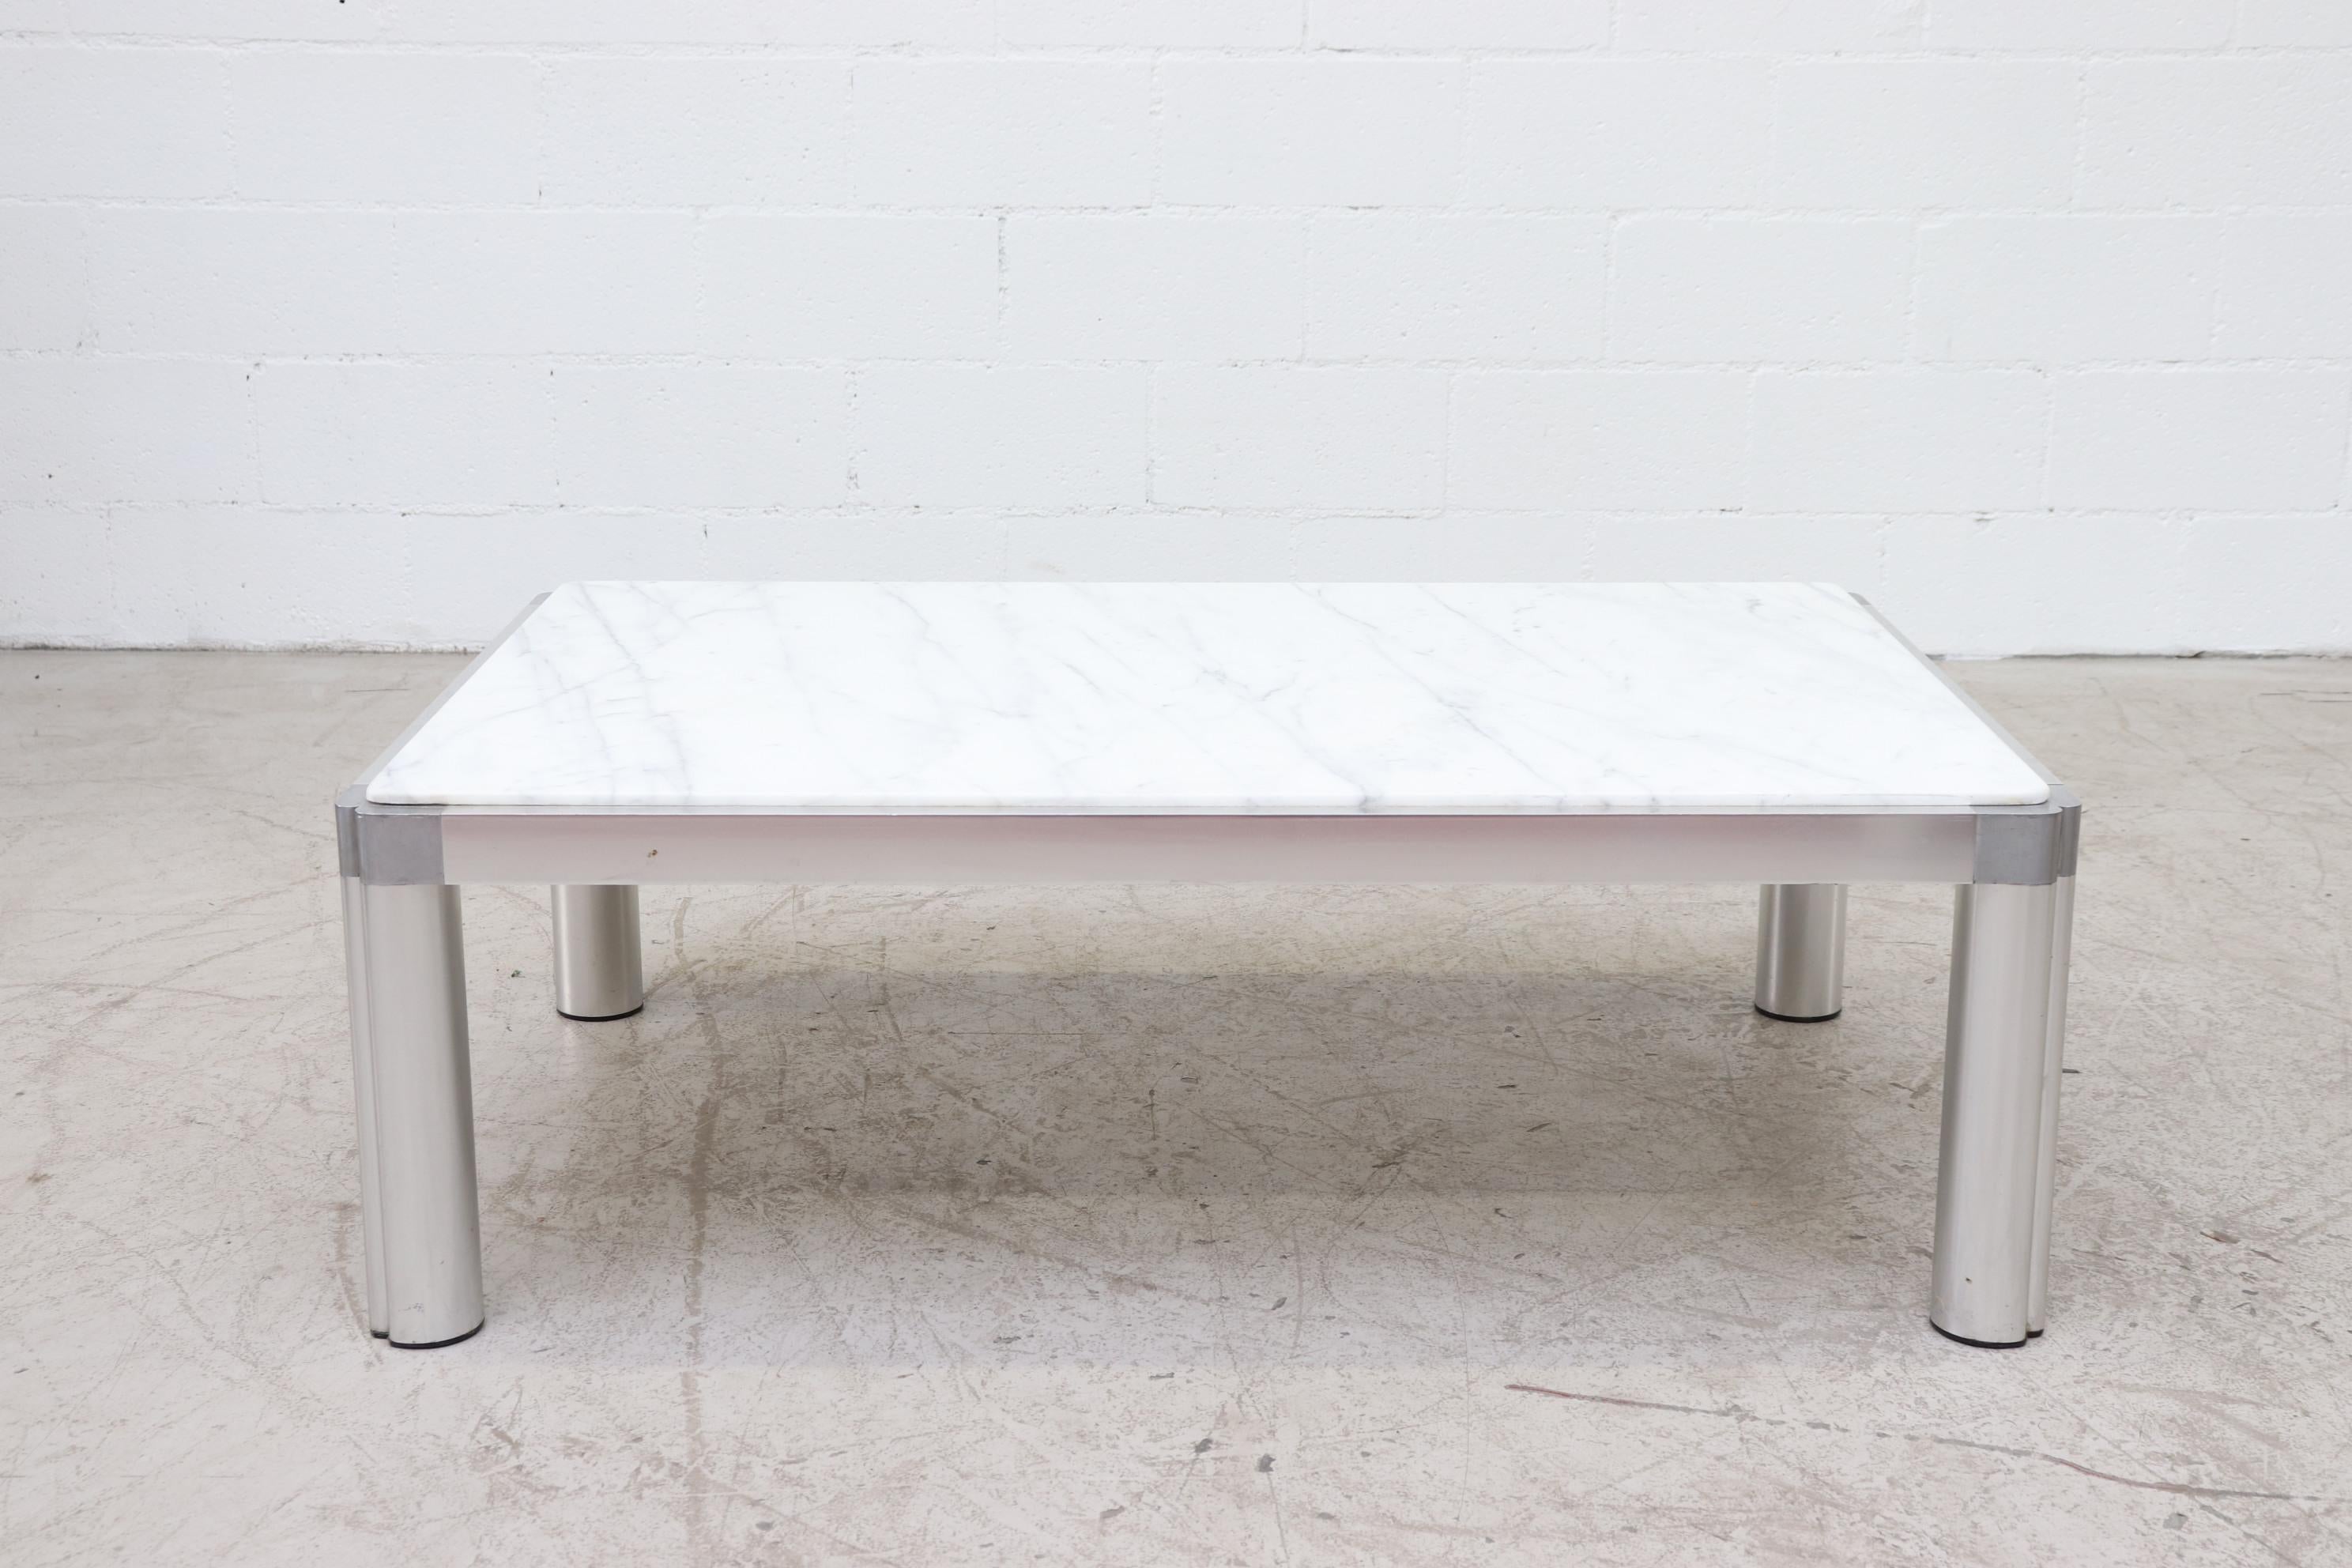 1970s modern Artifort M100 coffee table by Kho Liang Ie. The base (leg and beam) are of extruded, anodized aluminum, connected by corner elements in polished cast iron, with plastic glides and inset marble top. 